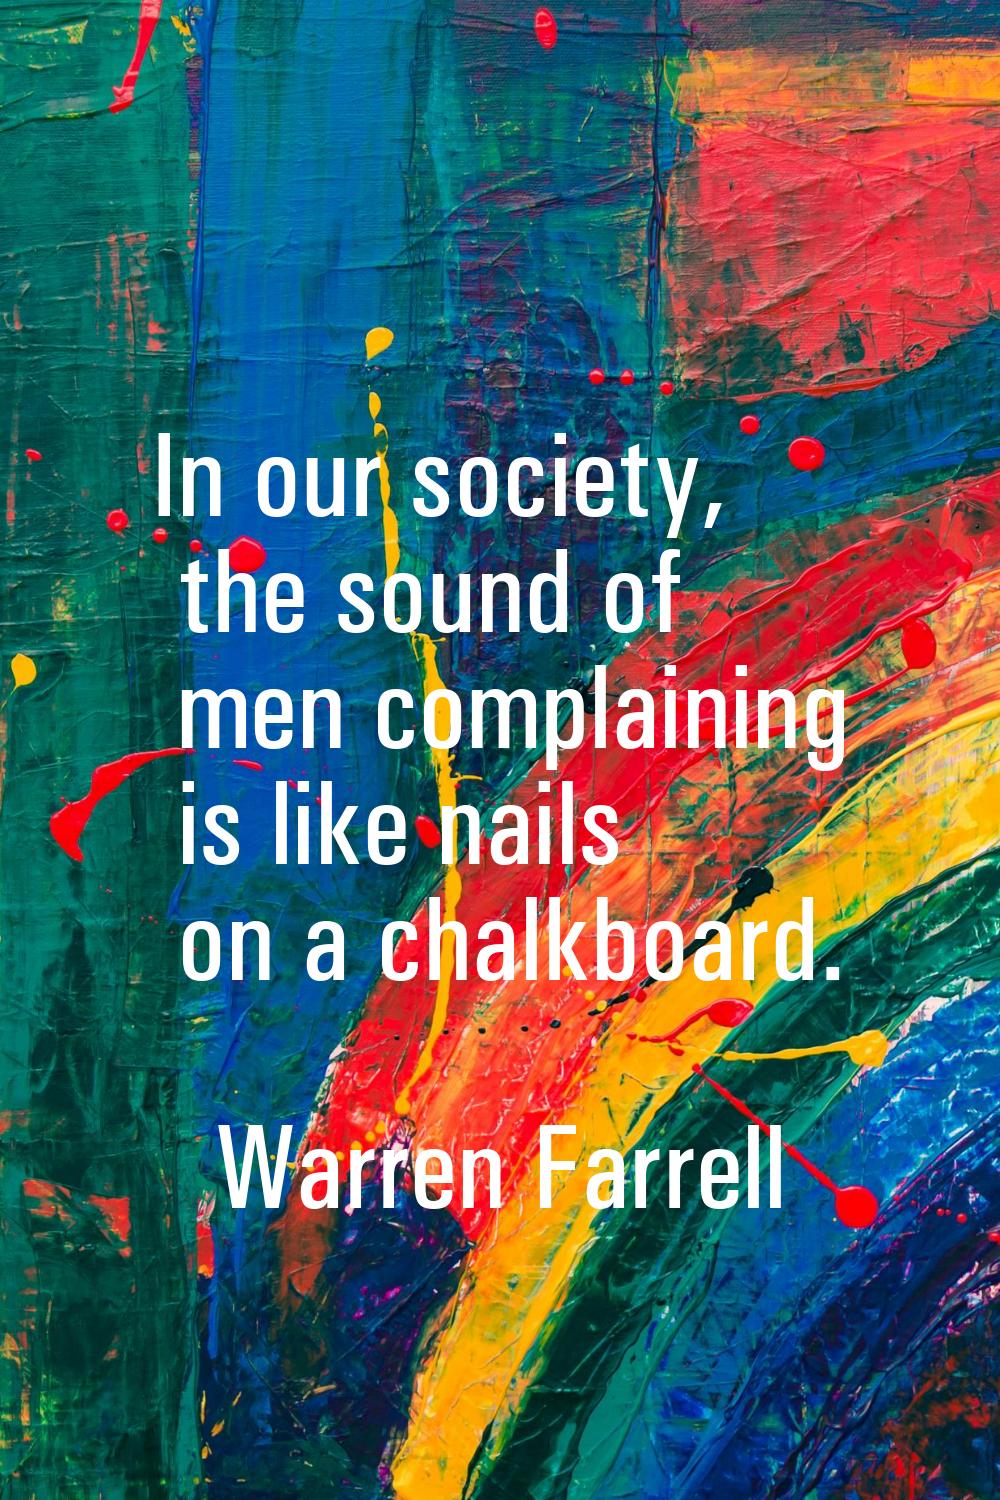 In our society, the sound of men complaining is like nails on a chalkboard.